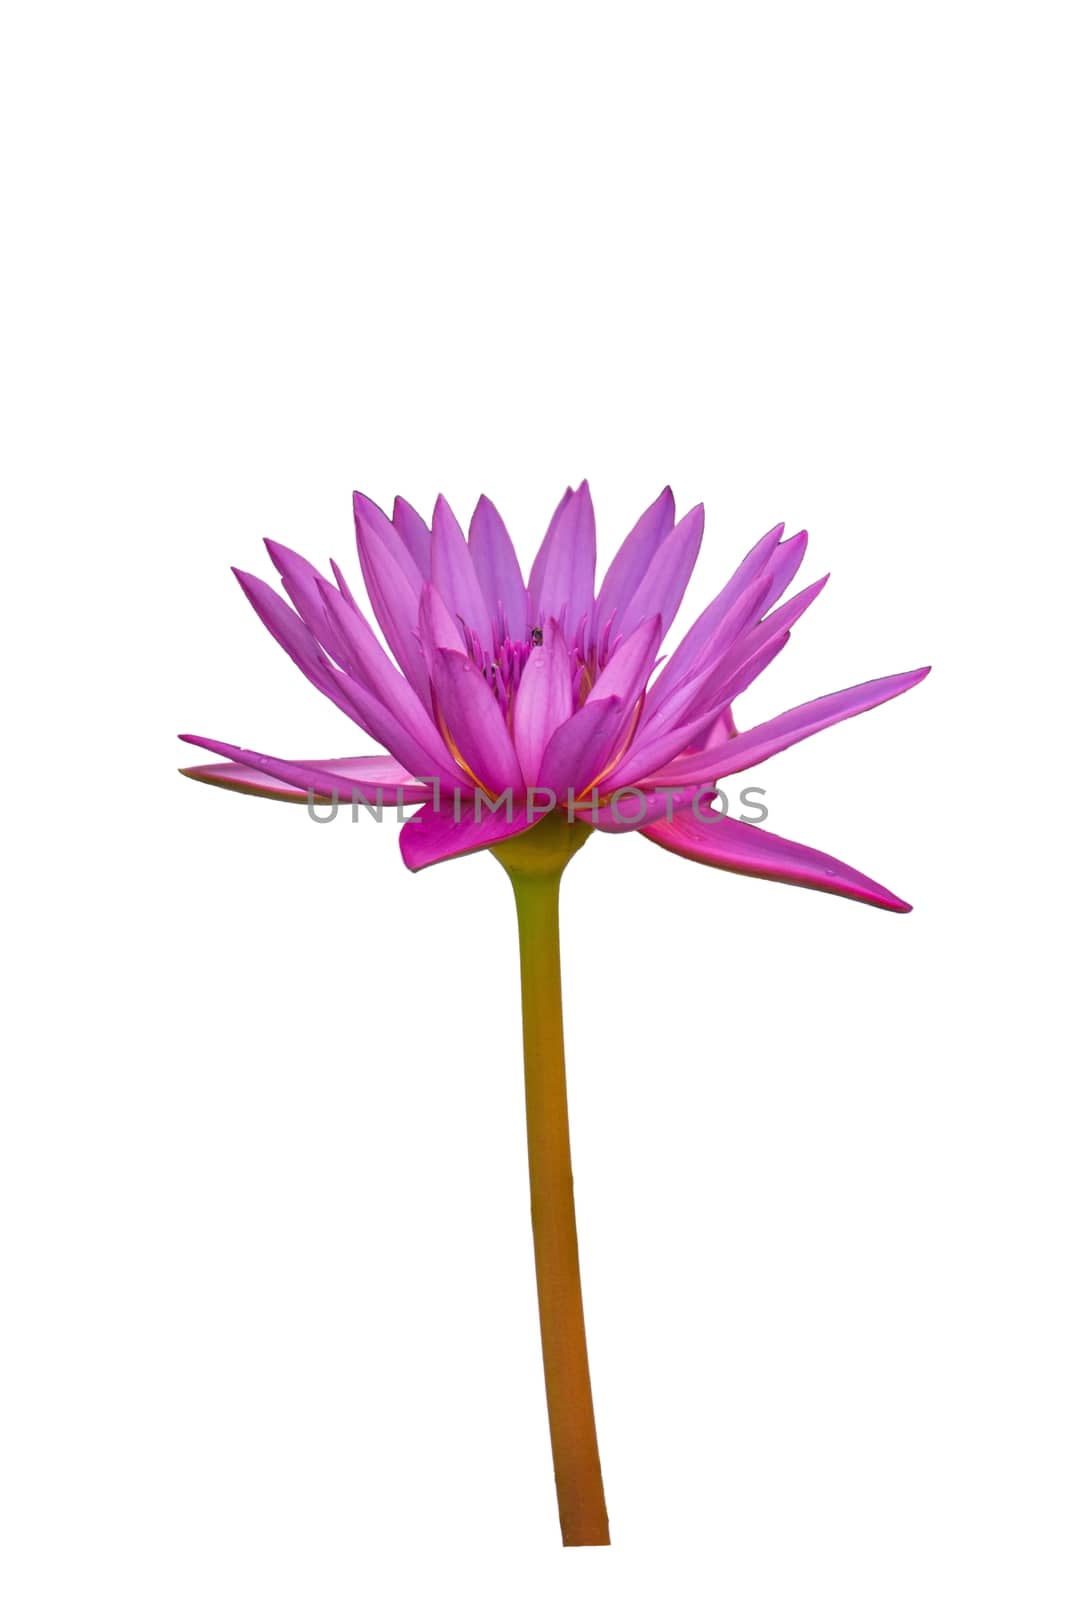 side view purple lotus isolated on white background. by peerapixs